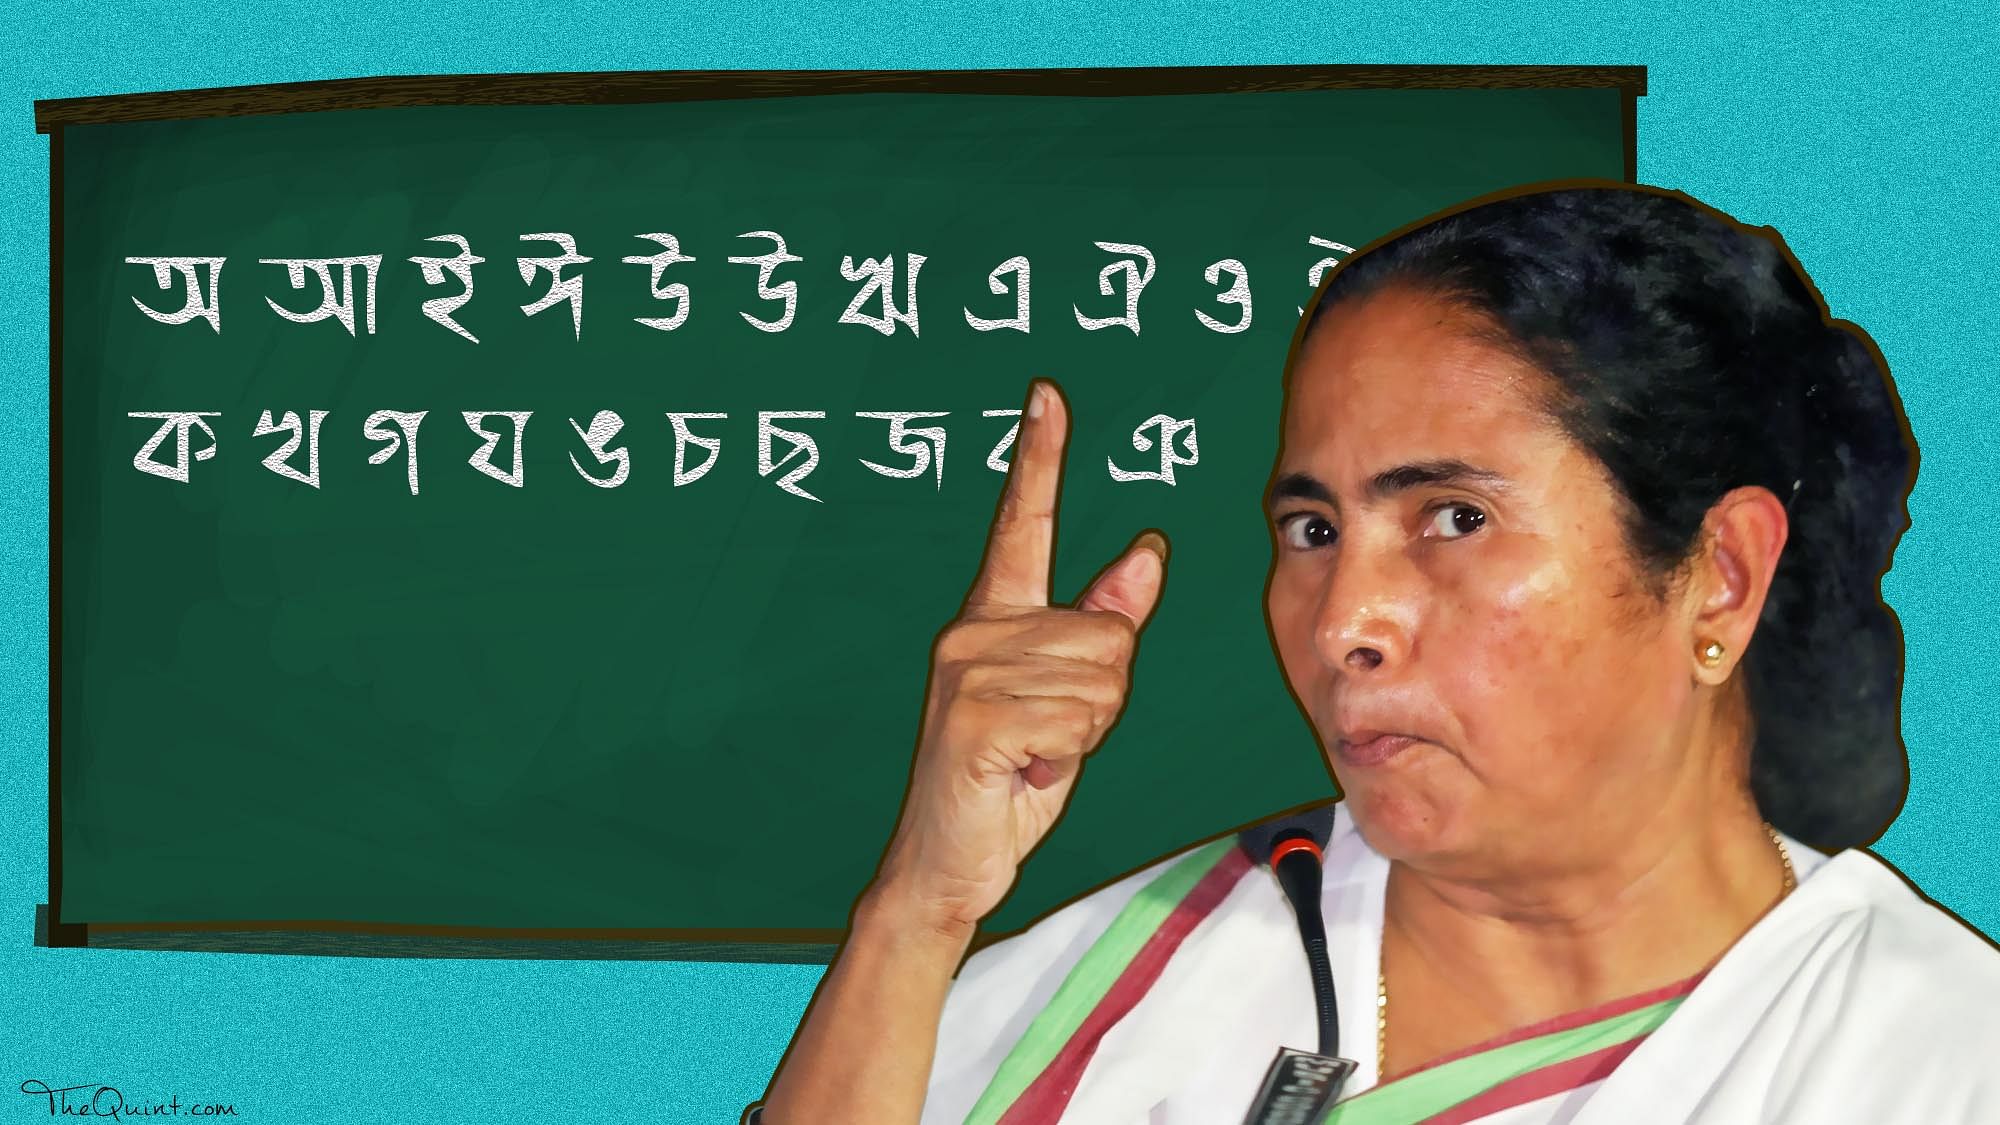 By making Bengali compulsory in schools, Mamata is endorsing linguistic chauvinism that endangers the idea of India. (Photo: Rhythum Seth/ <b>The Quint</b>)